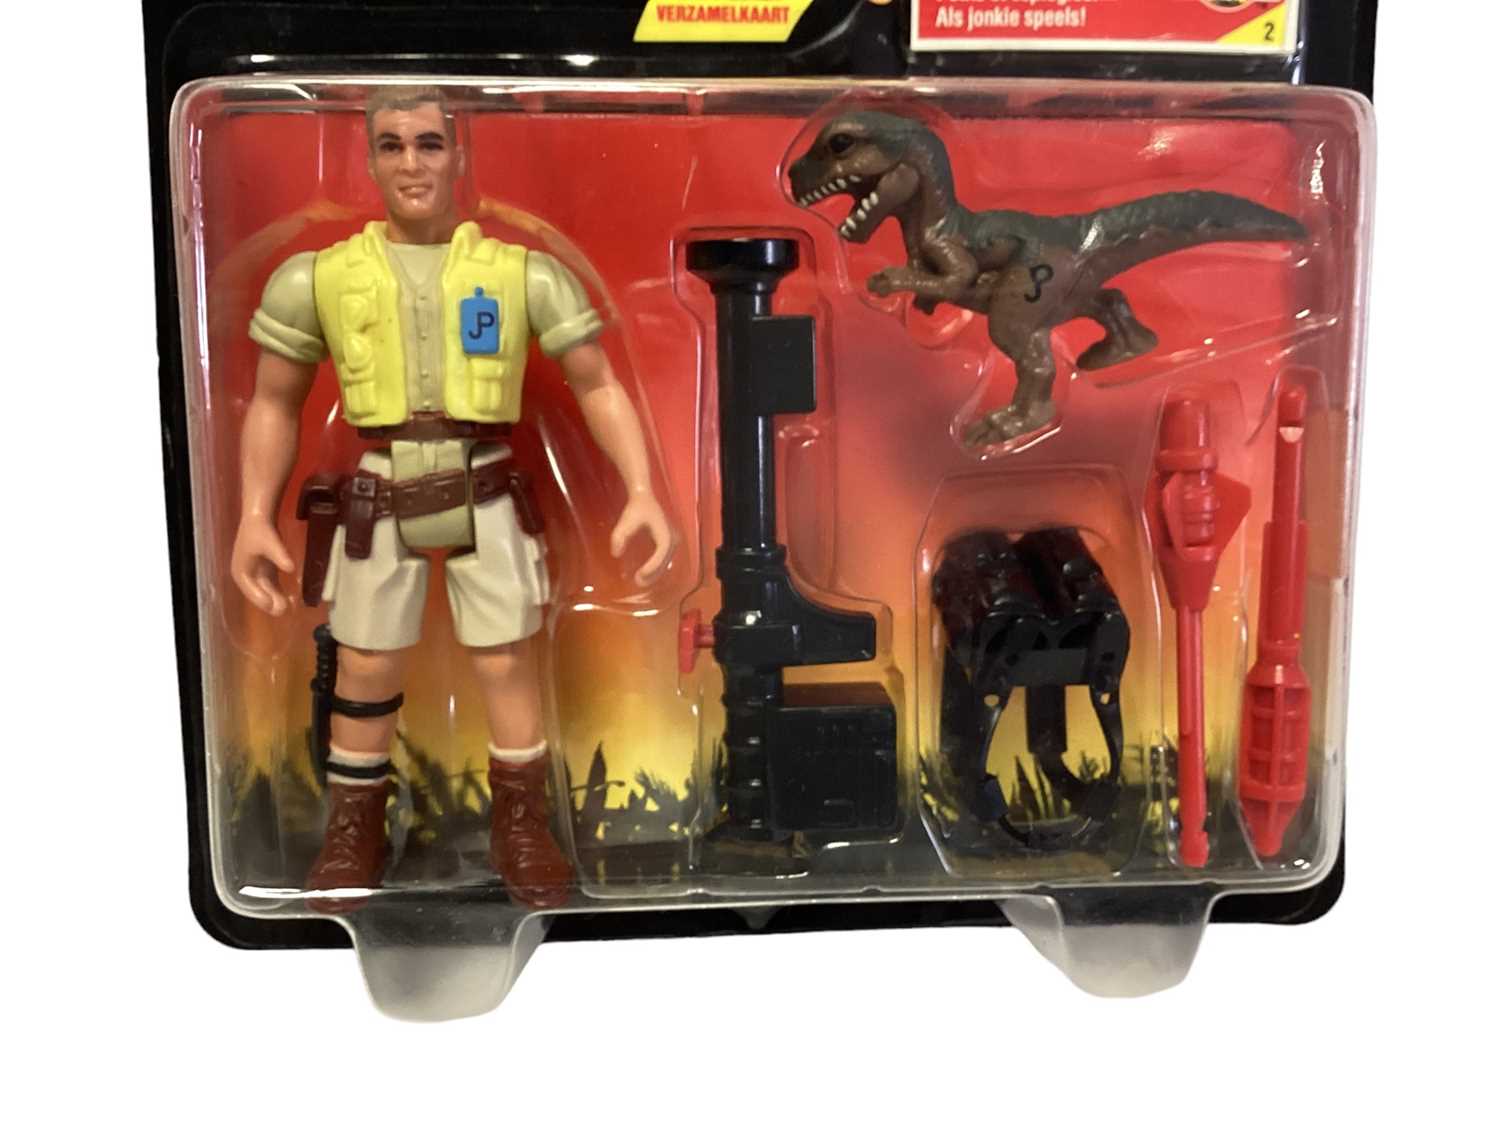 Kenner (c1993) Jurassic Park action figure Robert Muldoon, on card with bubblepack No.61003 (1) - Image 2 of 3